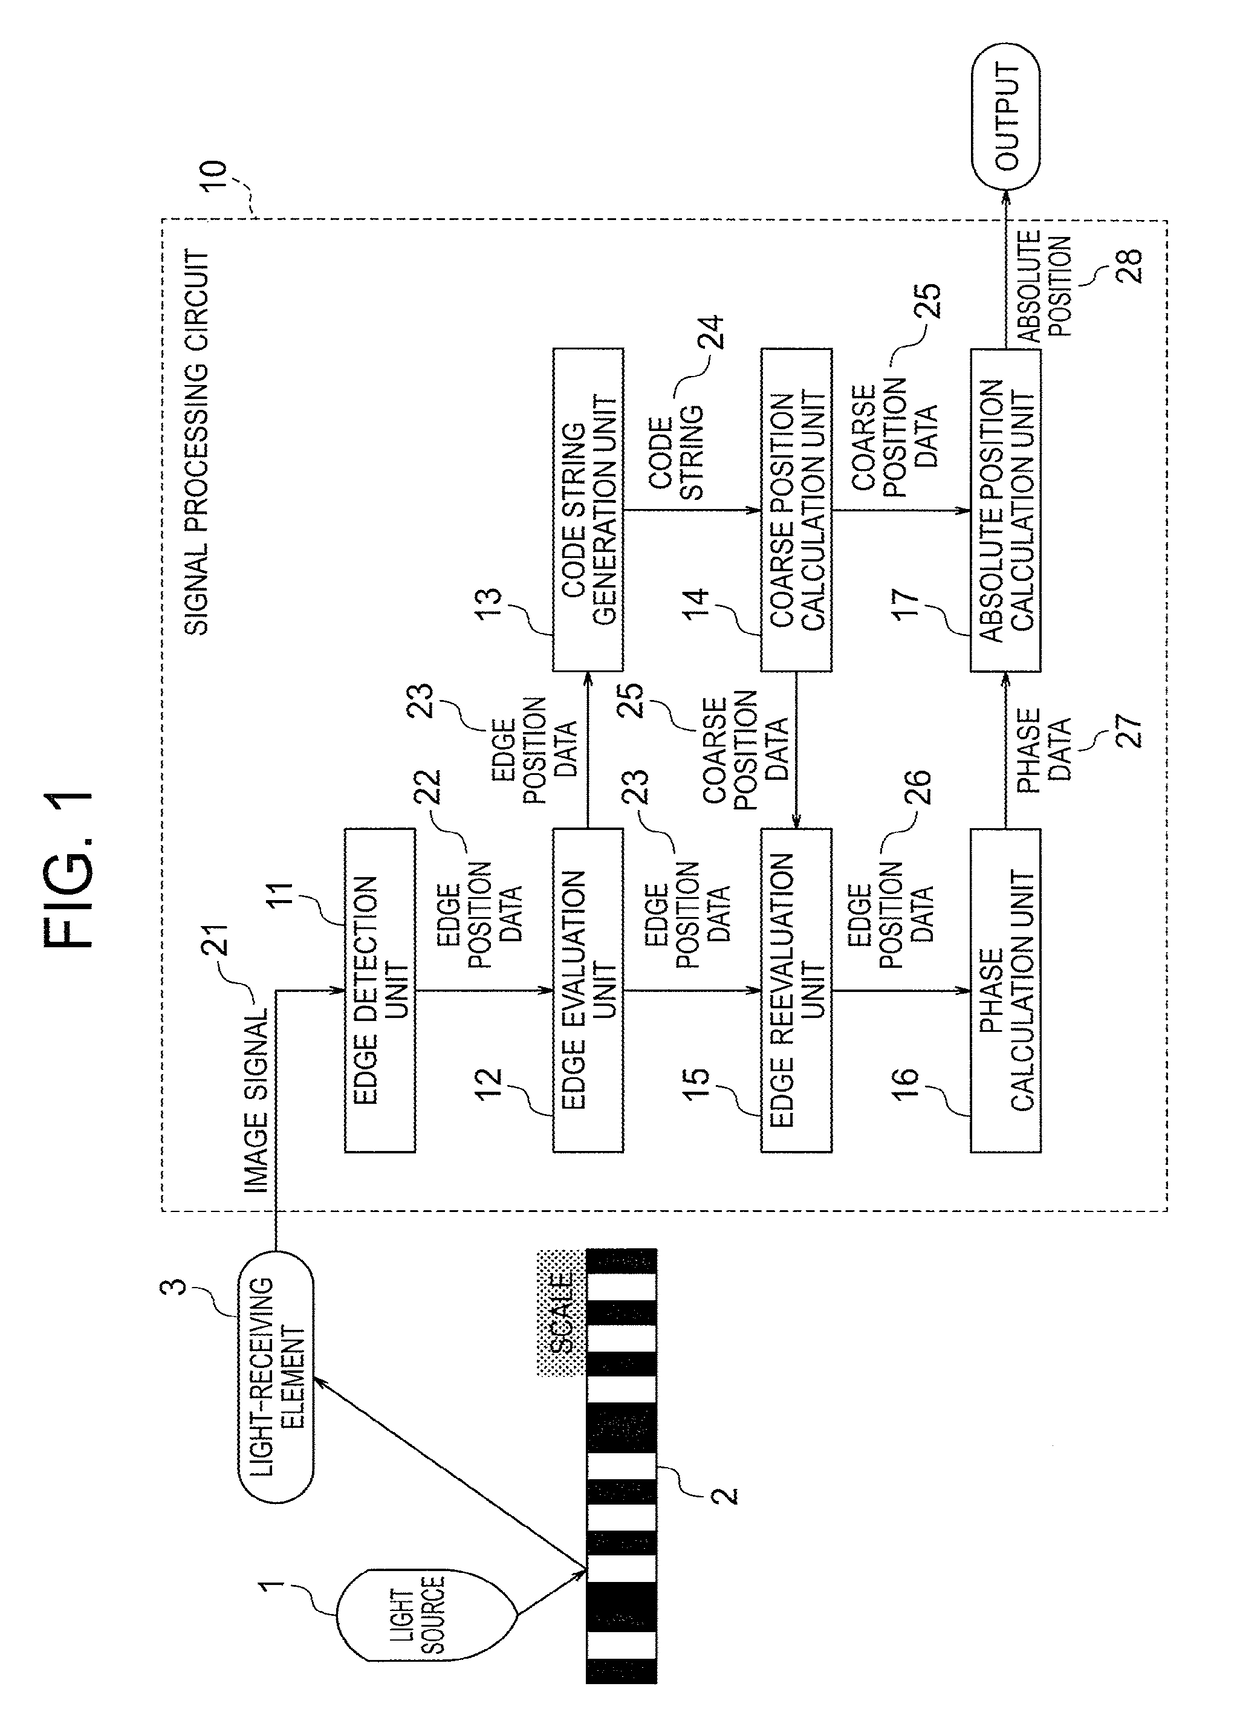 Position detection device